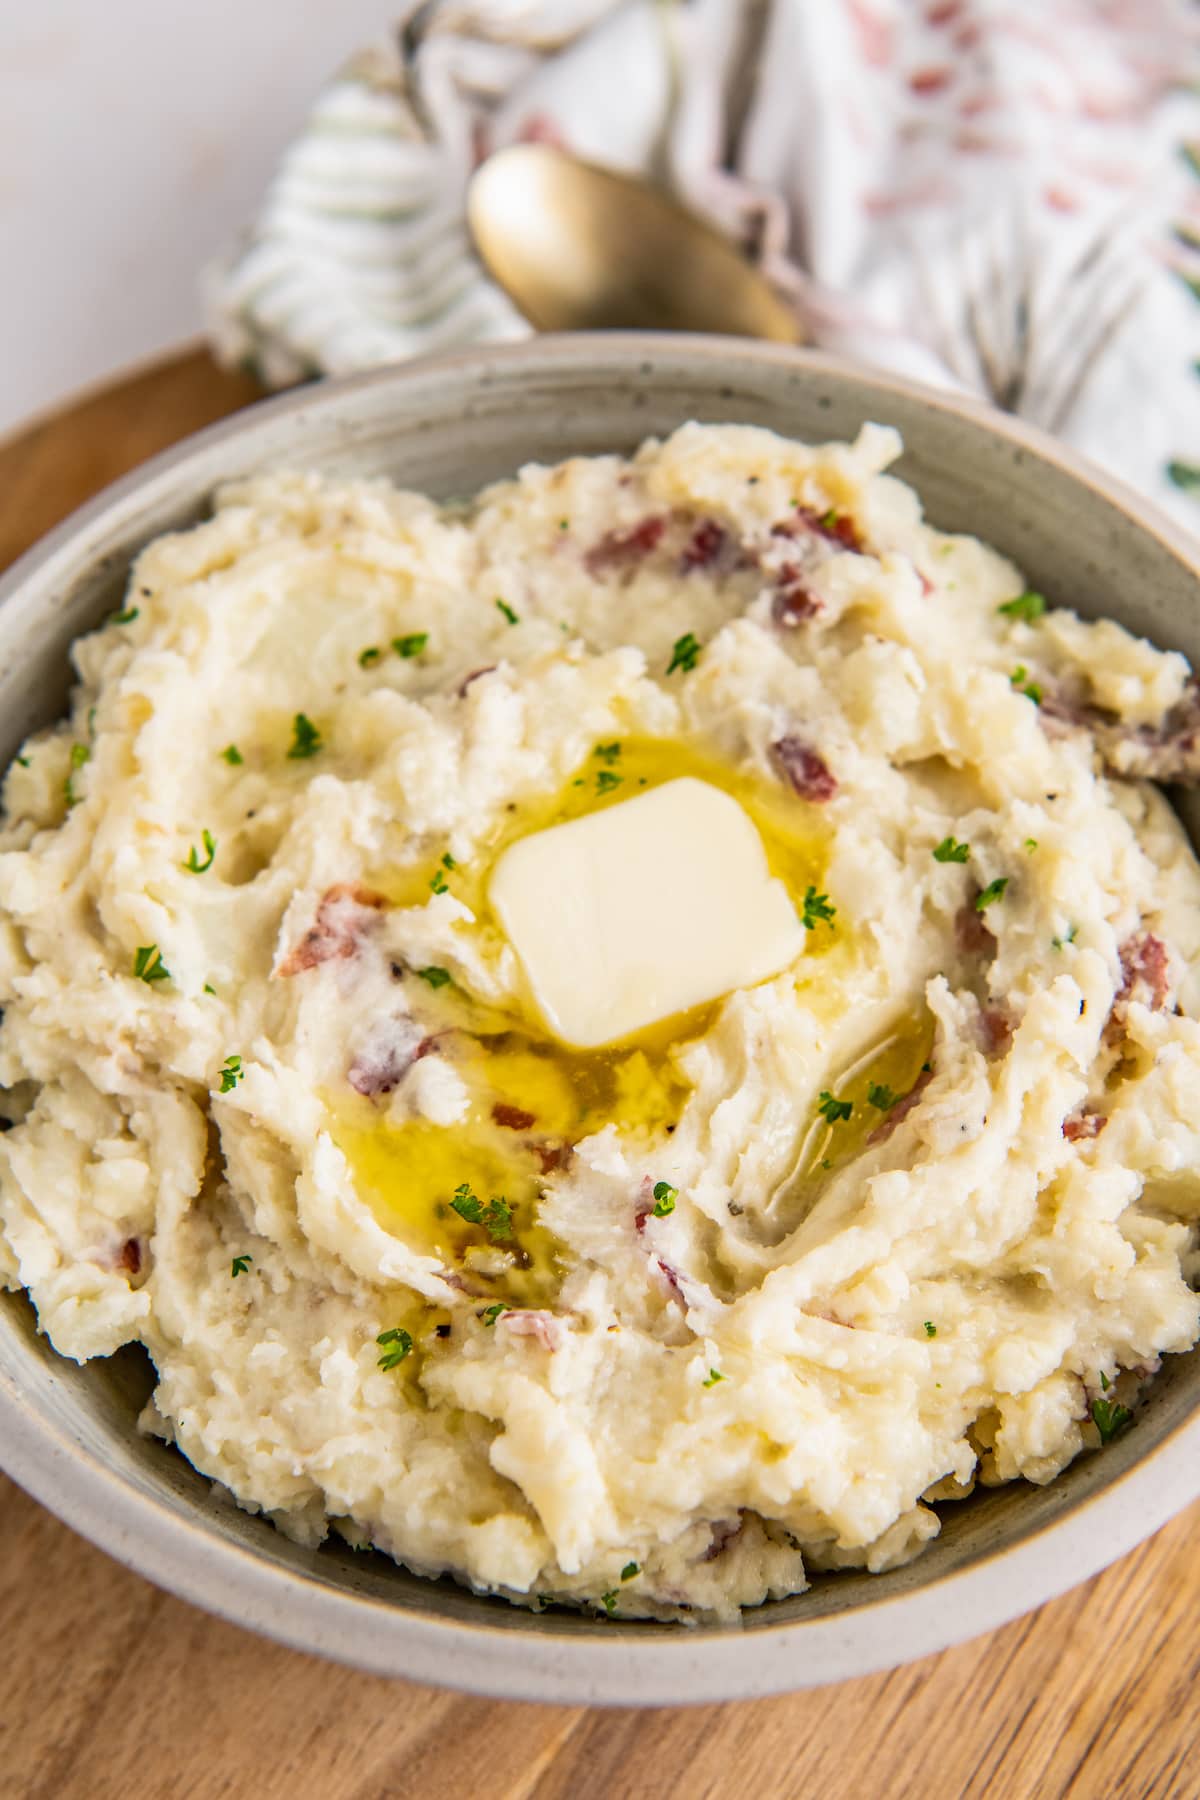 A big bowl is filled with mashed potatoes and topped with a pat of butter.